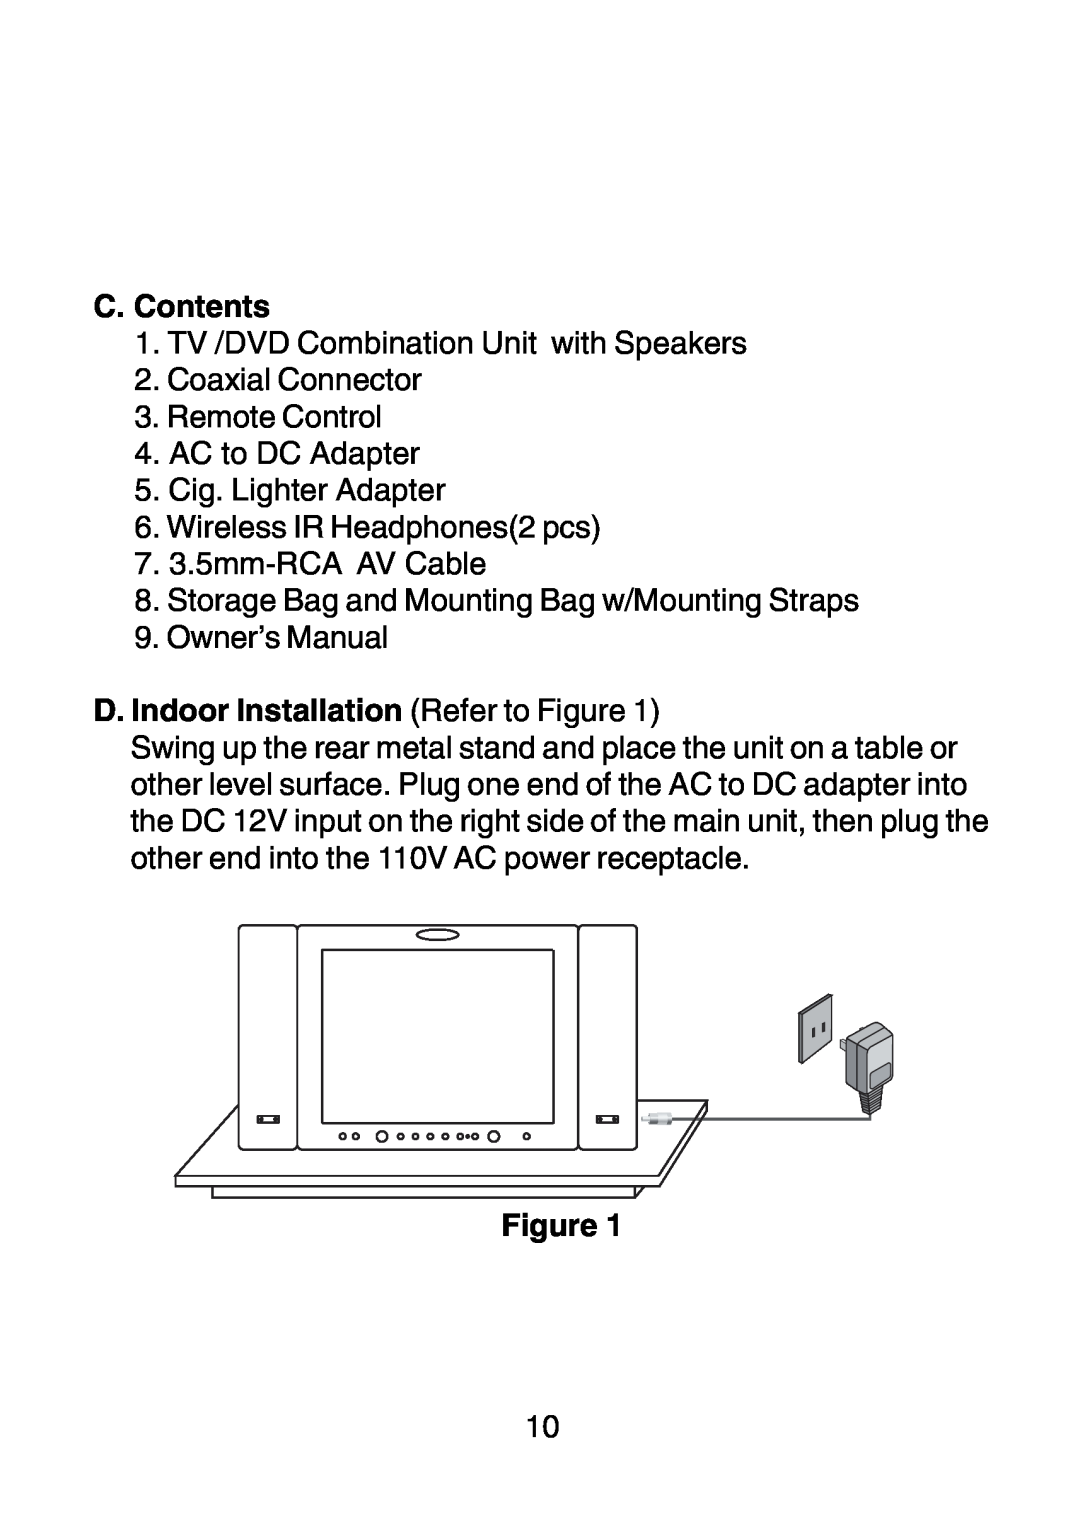 Audiovox D1210 owner manual C. Contents, D. Indoor Installation Refer to Figure 